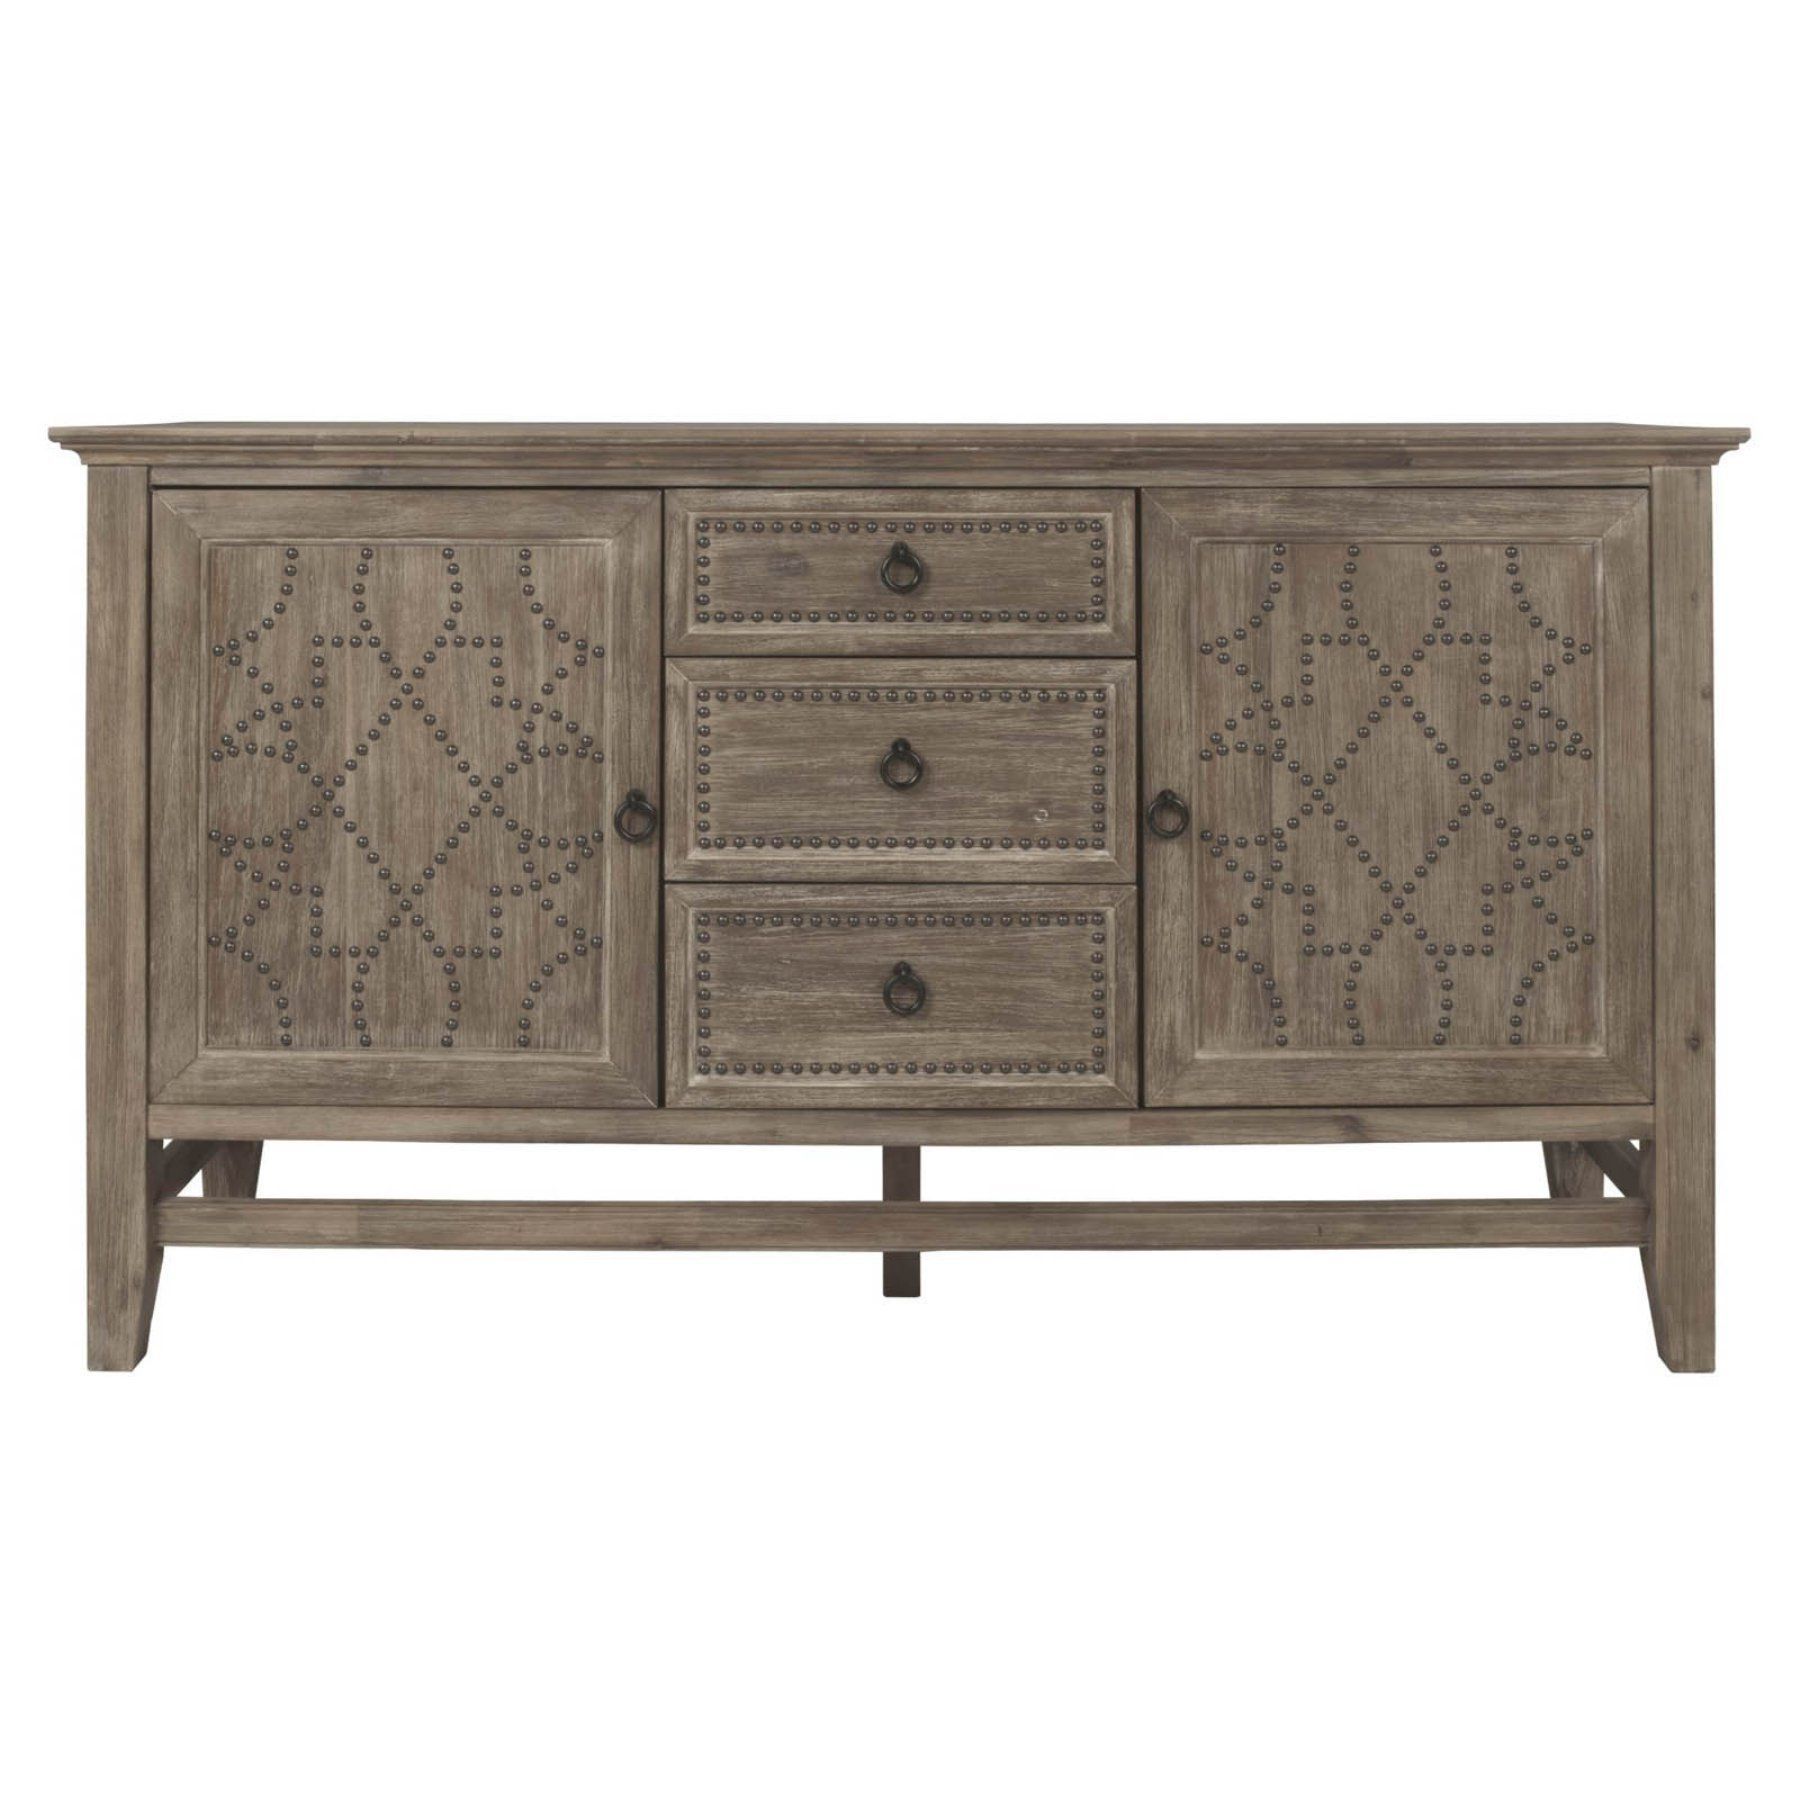 Orient Express Furniture Traditions Braxton Sideboard – 6092 In Most Popular Hayter Sideboards (View 3 of 20)